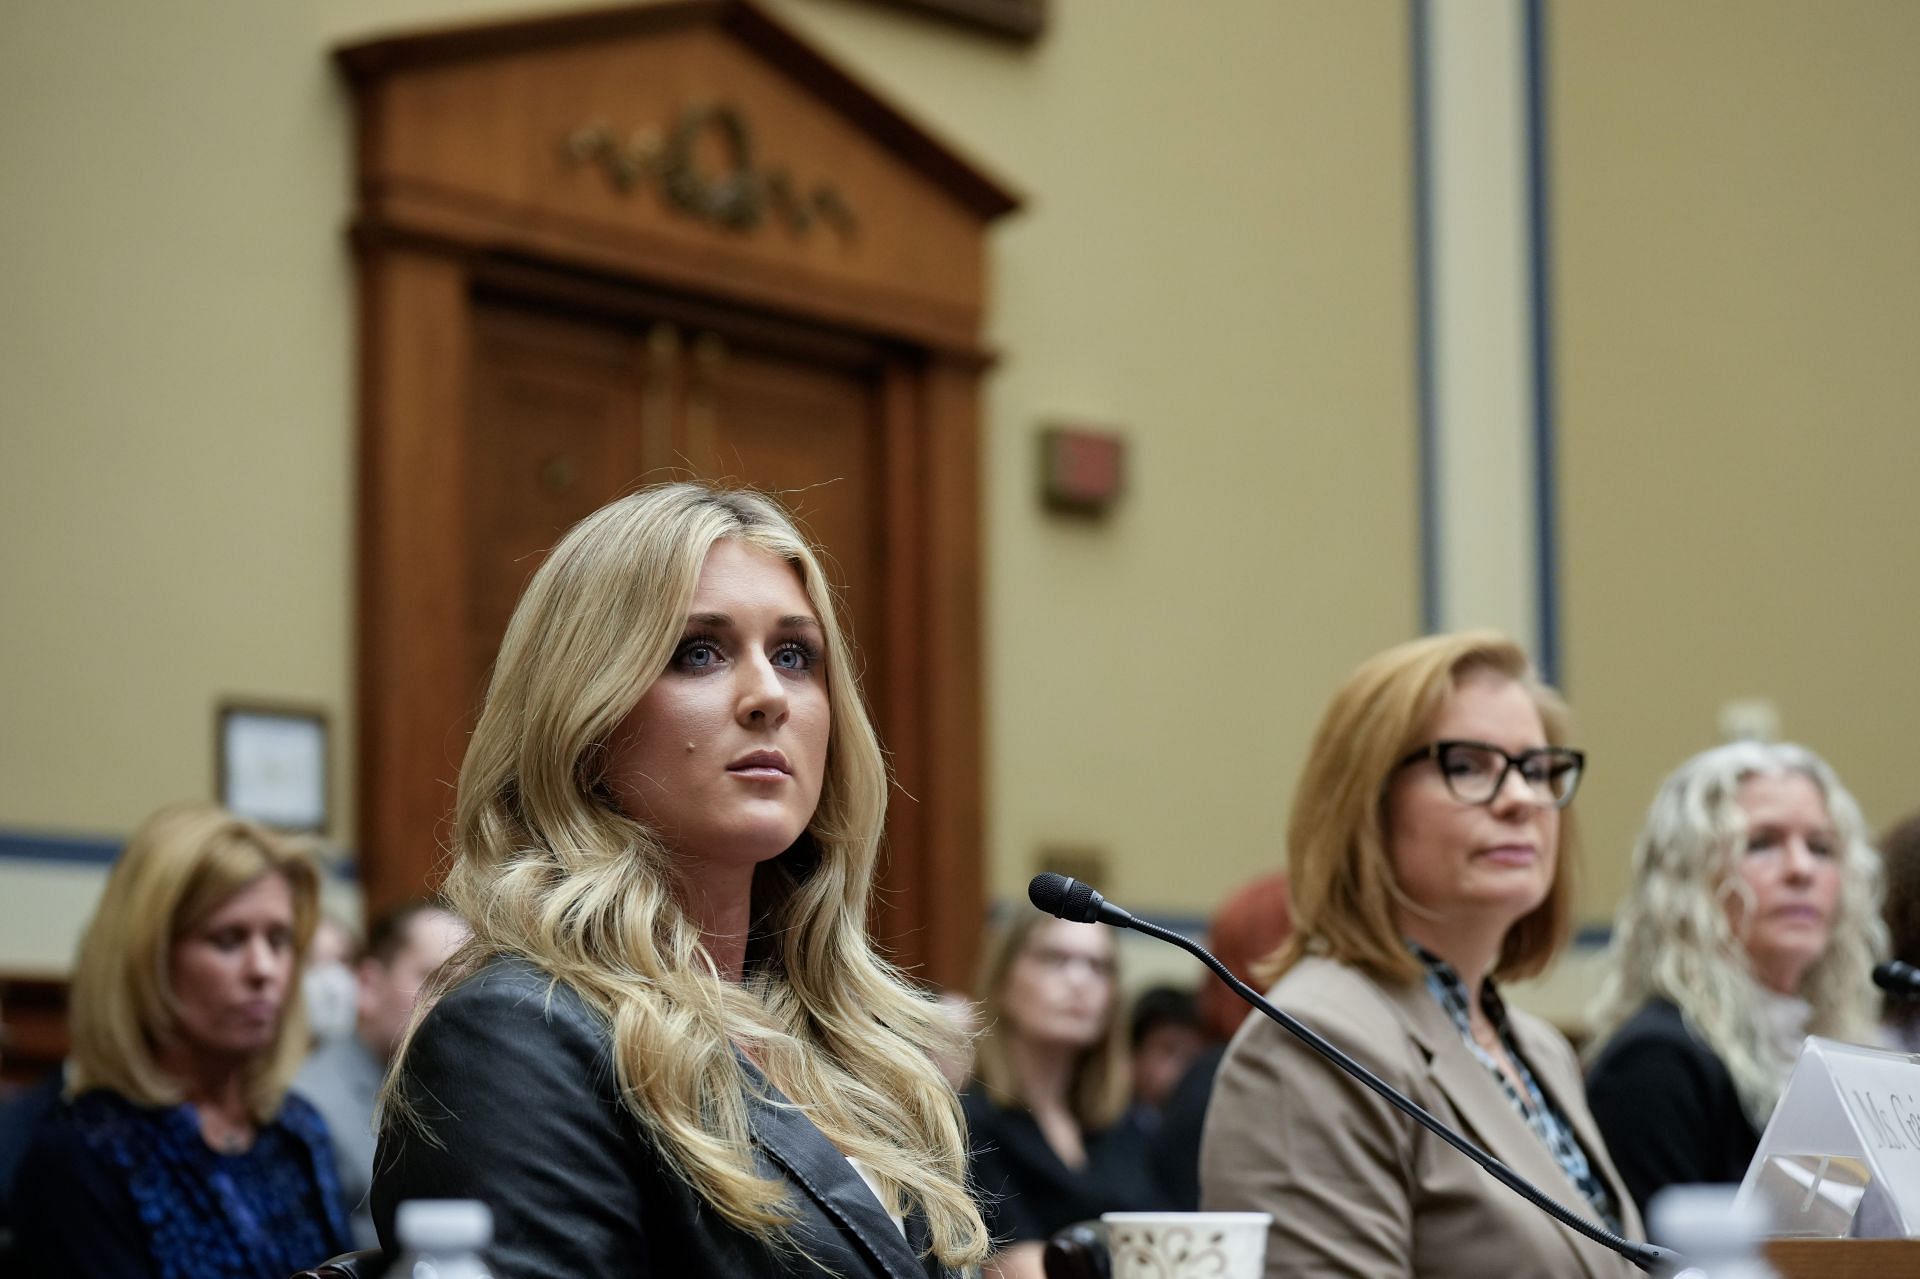 Riley Gaines (L) testifies during a House Oversight Subcommittee on Health Care and Financial Services hearing on Capitol Hill. (Photo by Drew Angerer/Getty Images)